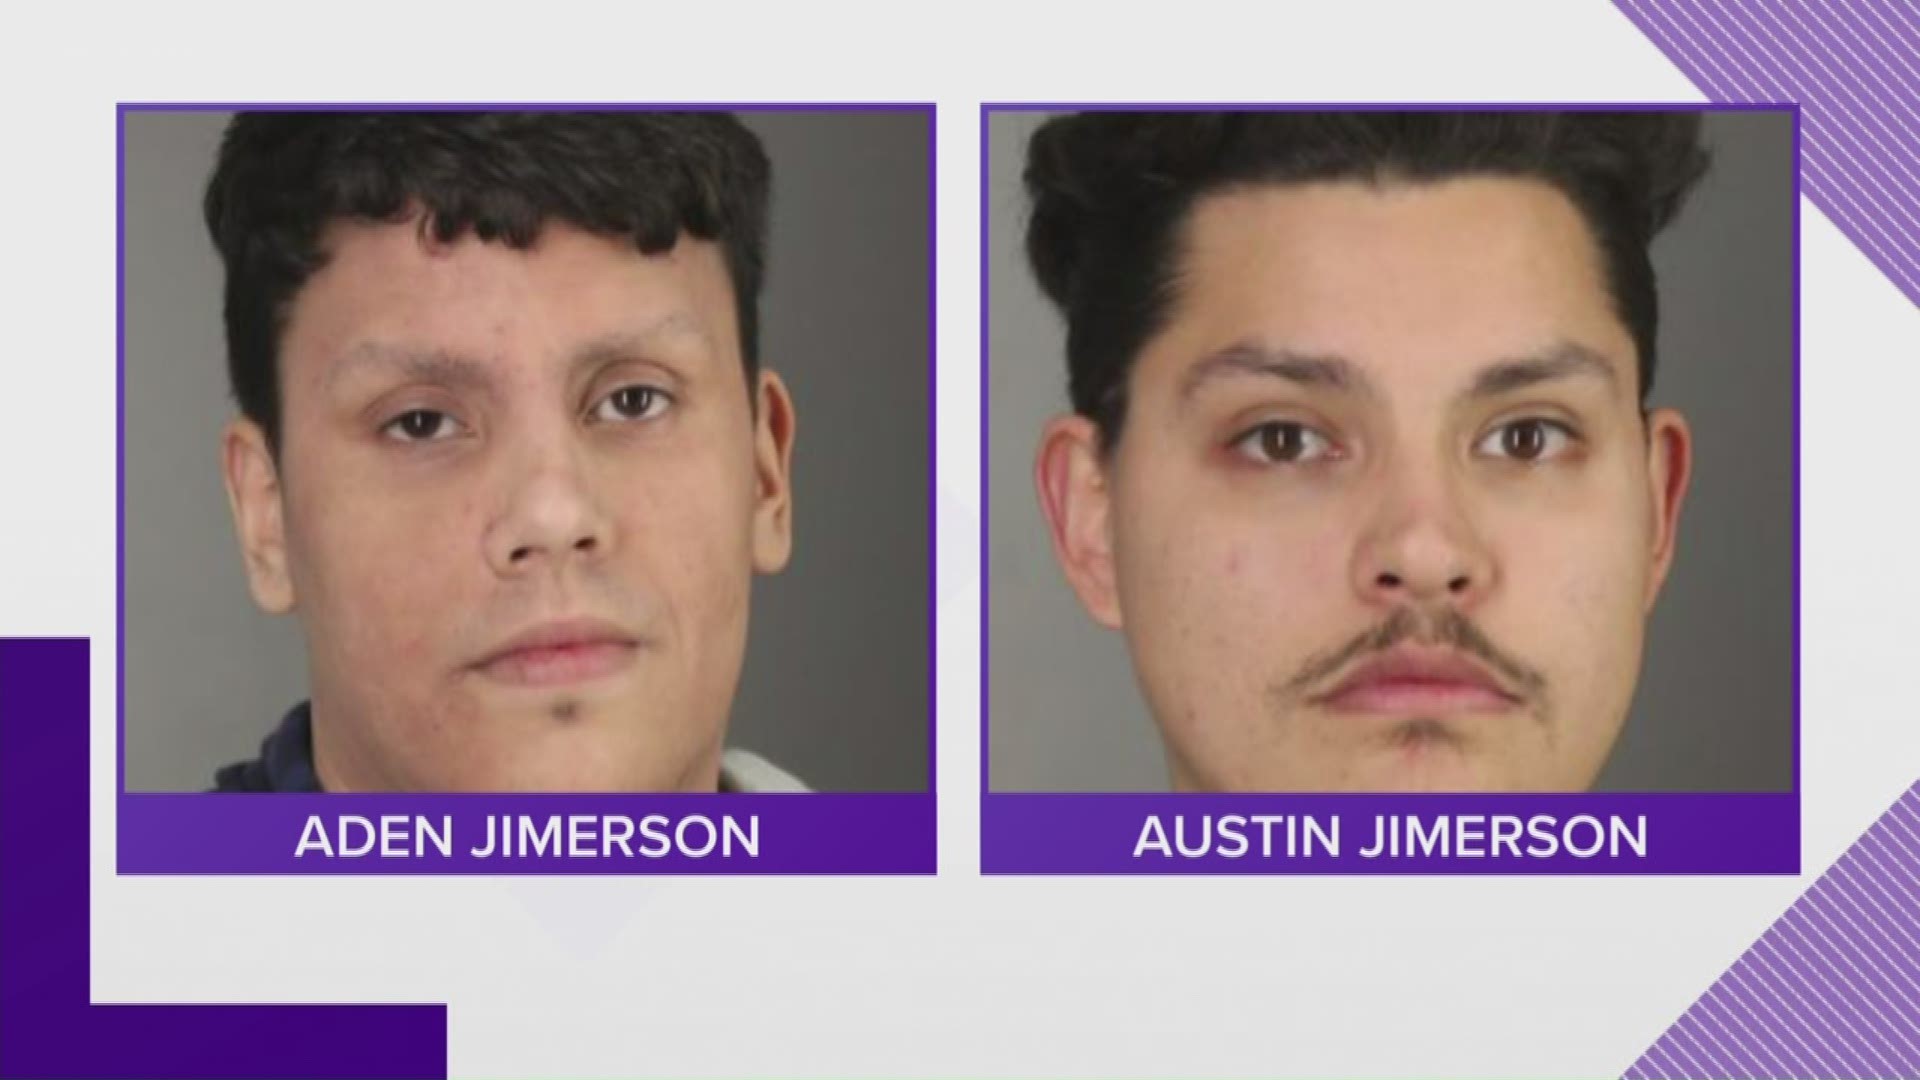 22 year old Austin Jimerson and his 20 year old brother, Aden went into a barn on Hemstreet Road then stole two chickens and a duck and killed them.